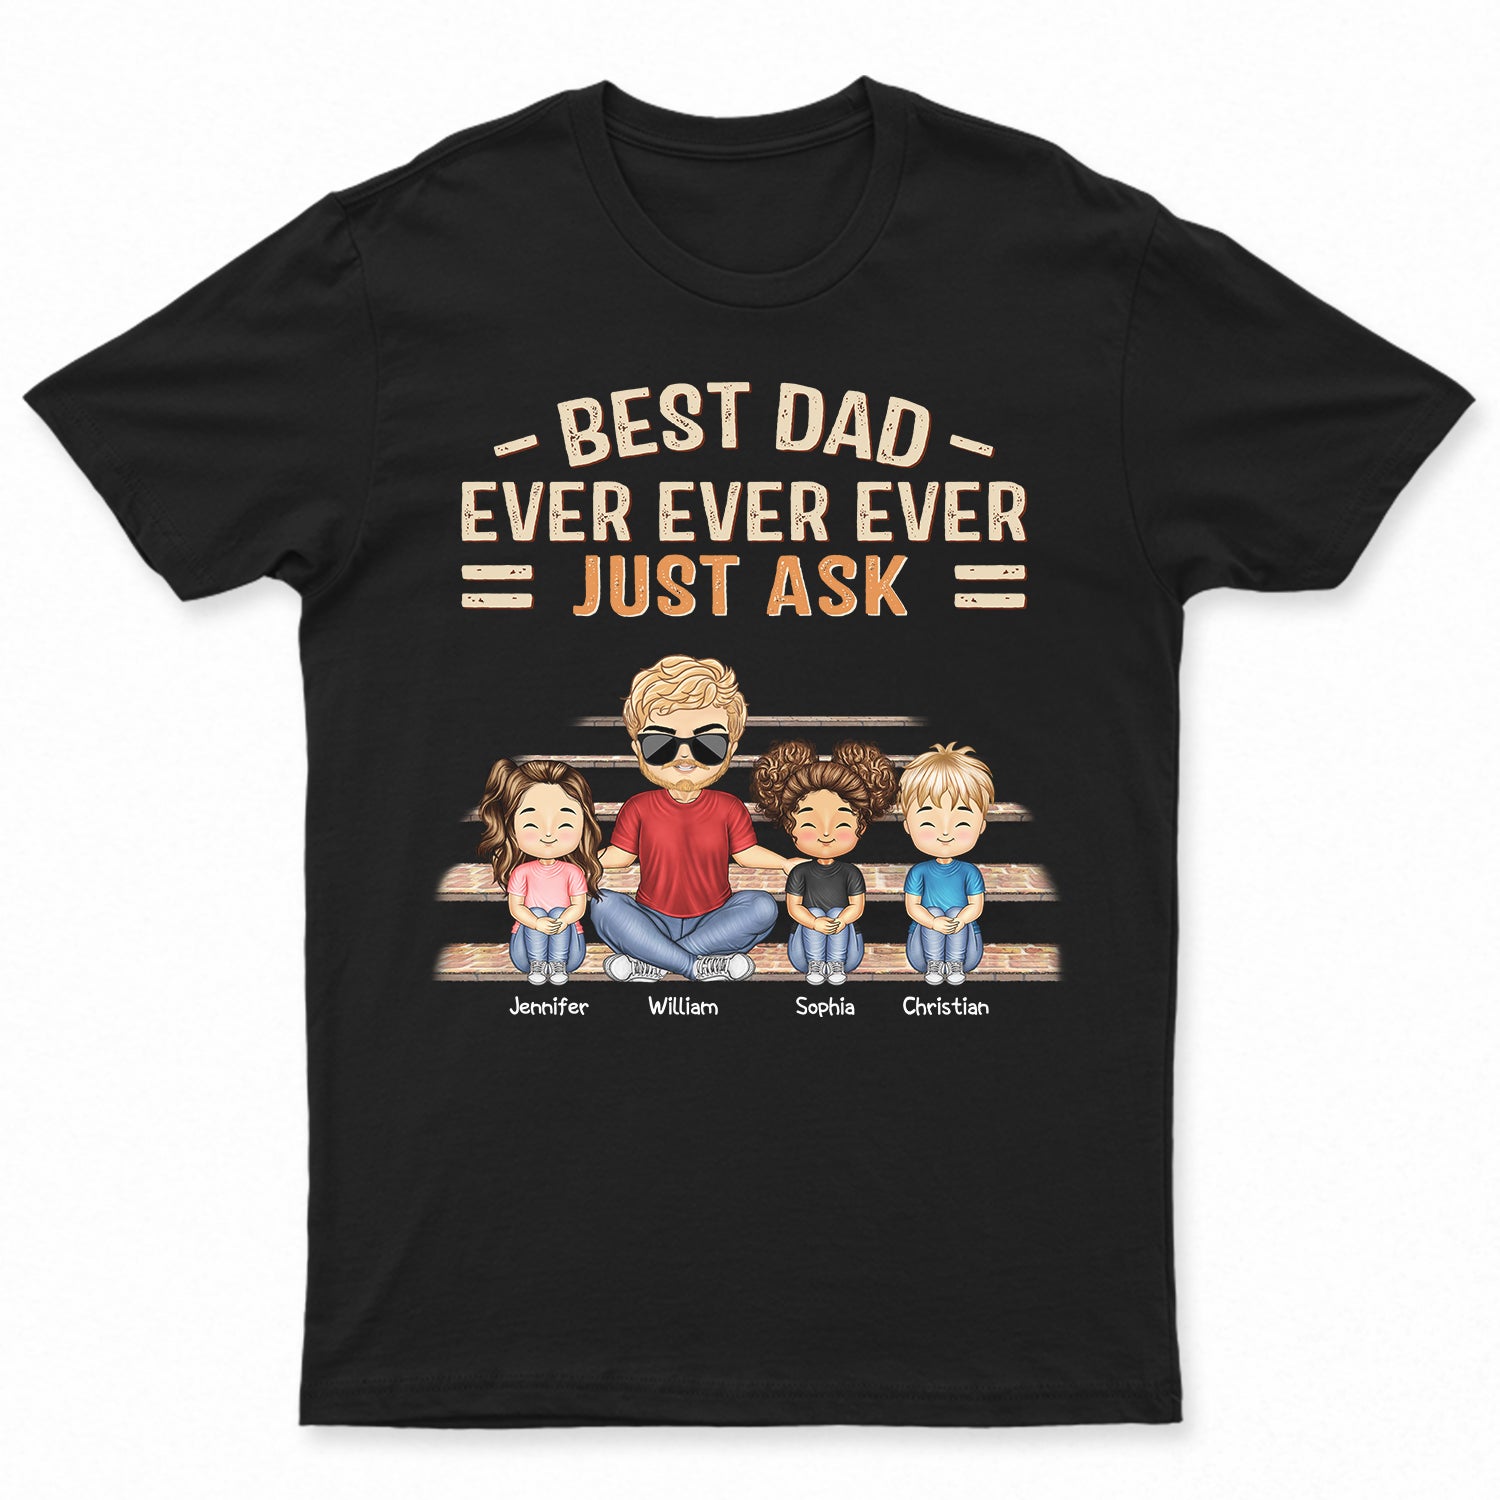 Best Dad Grandpa Ever Ever Ever Just Ask - Birthday, Loving Gift For Father, Grandfather - Personalized Custom T Shirt